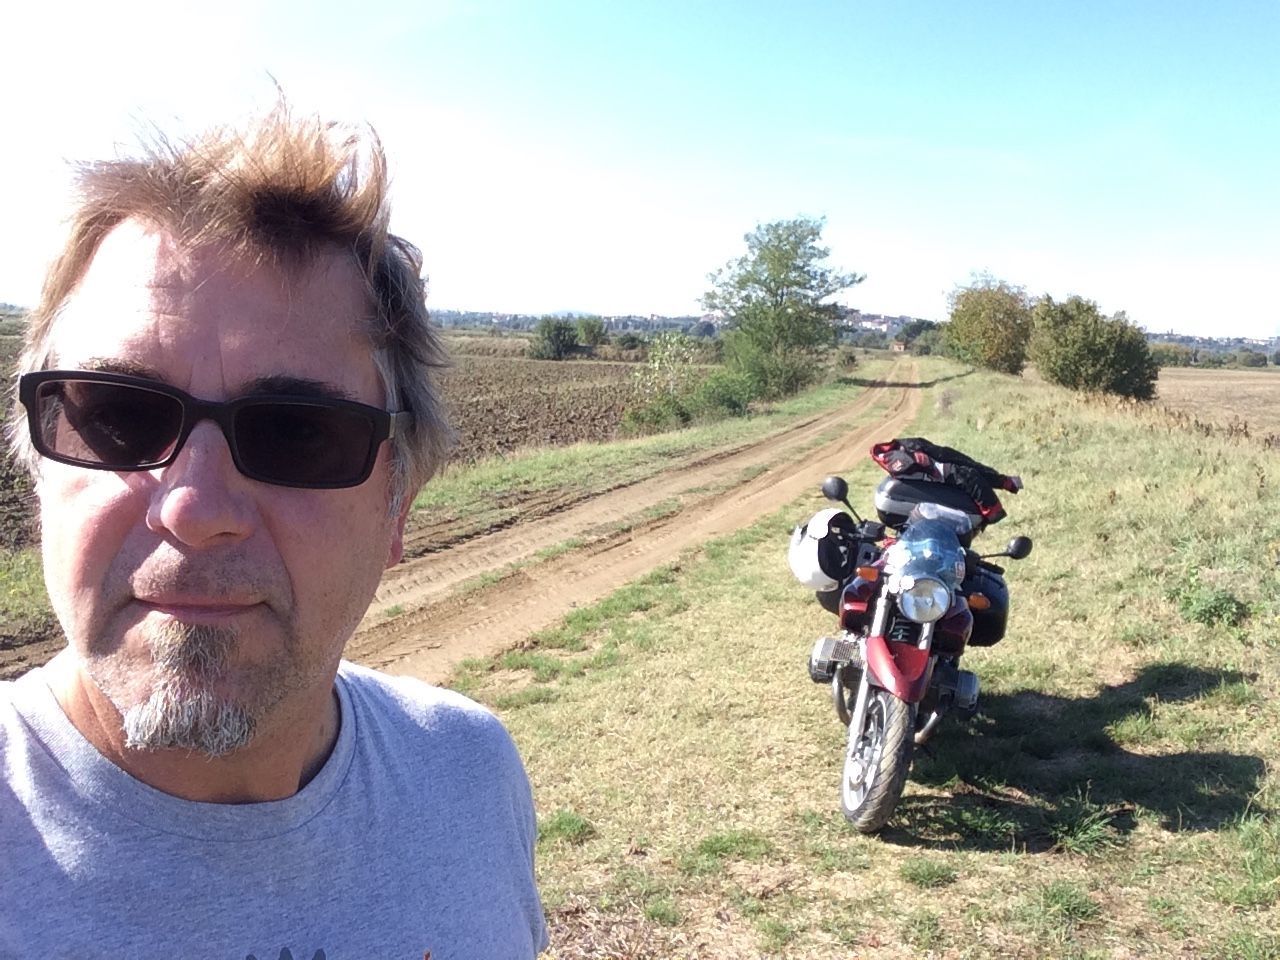 Solo backroading in Tuscany on a BMW R1150R running street tires, without incident 